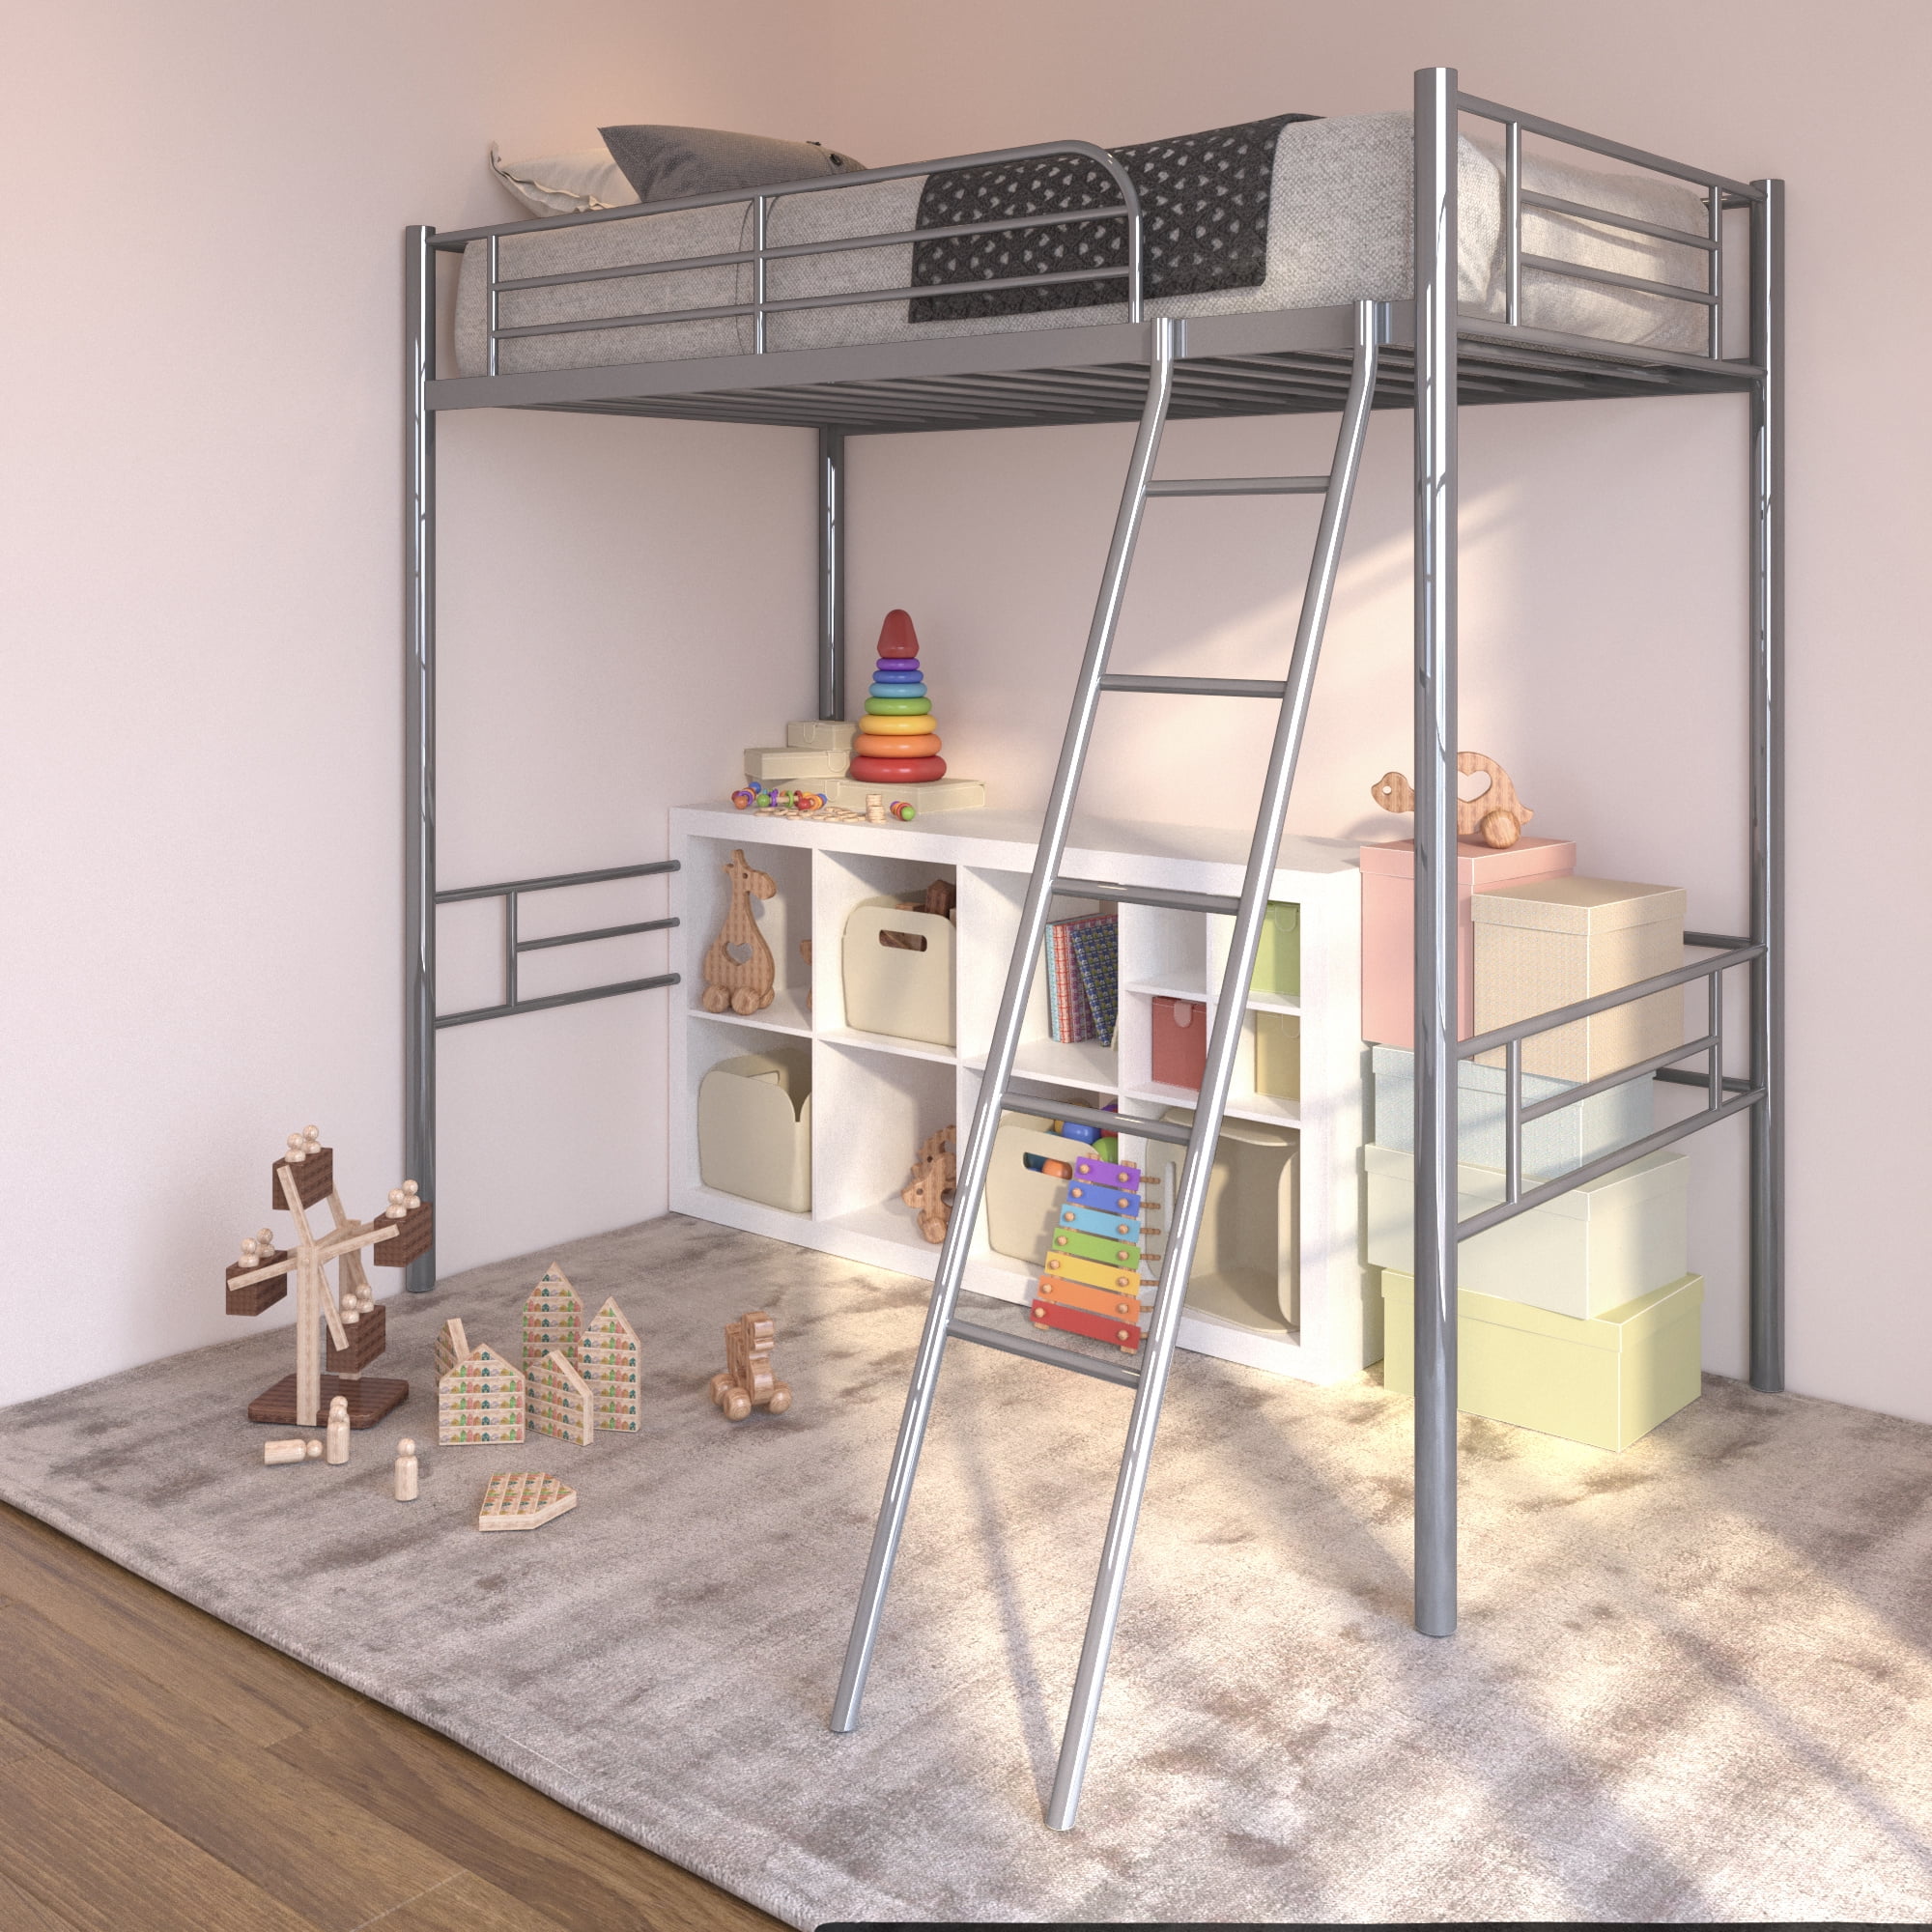 Metal Twin Loft Bed With Sy, New Bed Frame Smells Like Chemicals